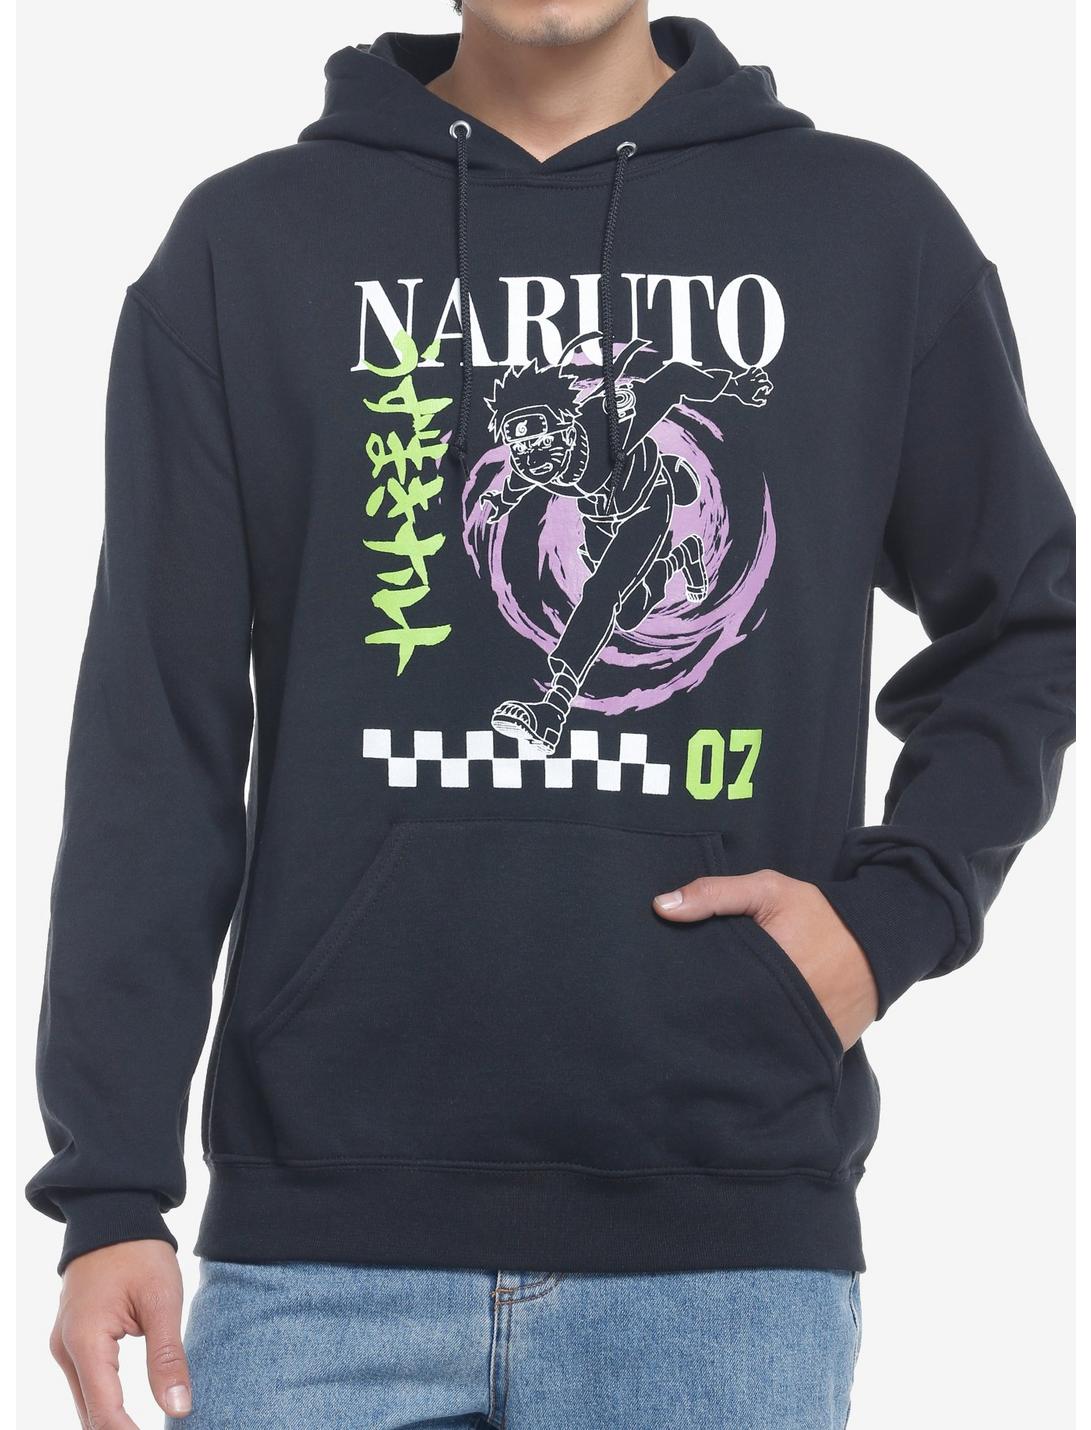 Naruto Shippuden Checkered Double-Sided Hoodie, BLACK, hi-res